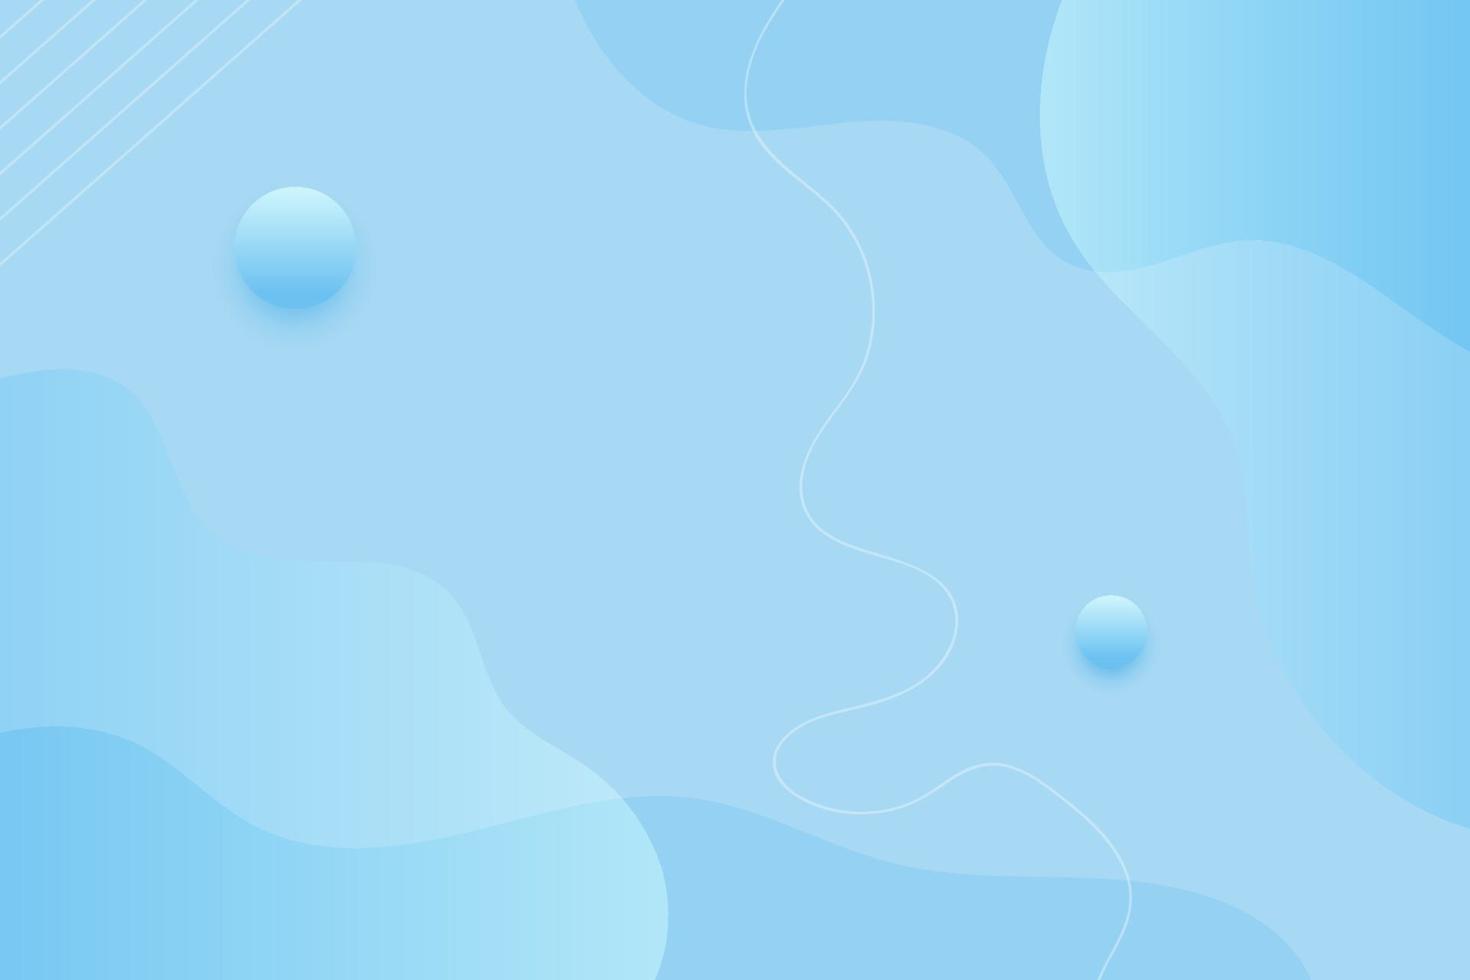 Abstract light blue vector background